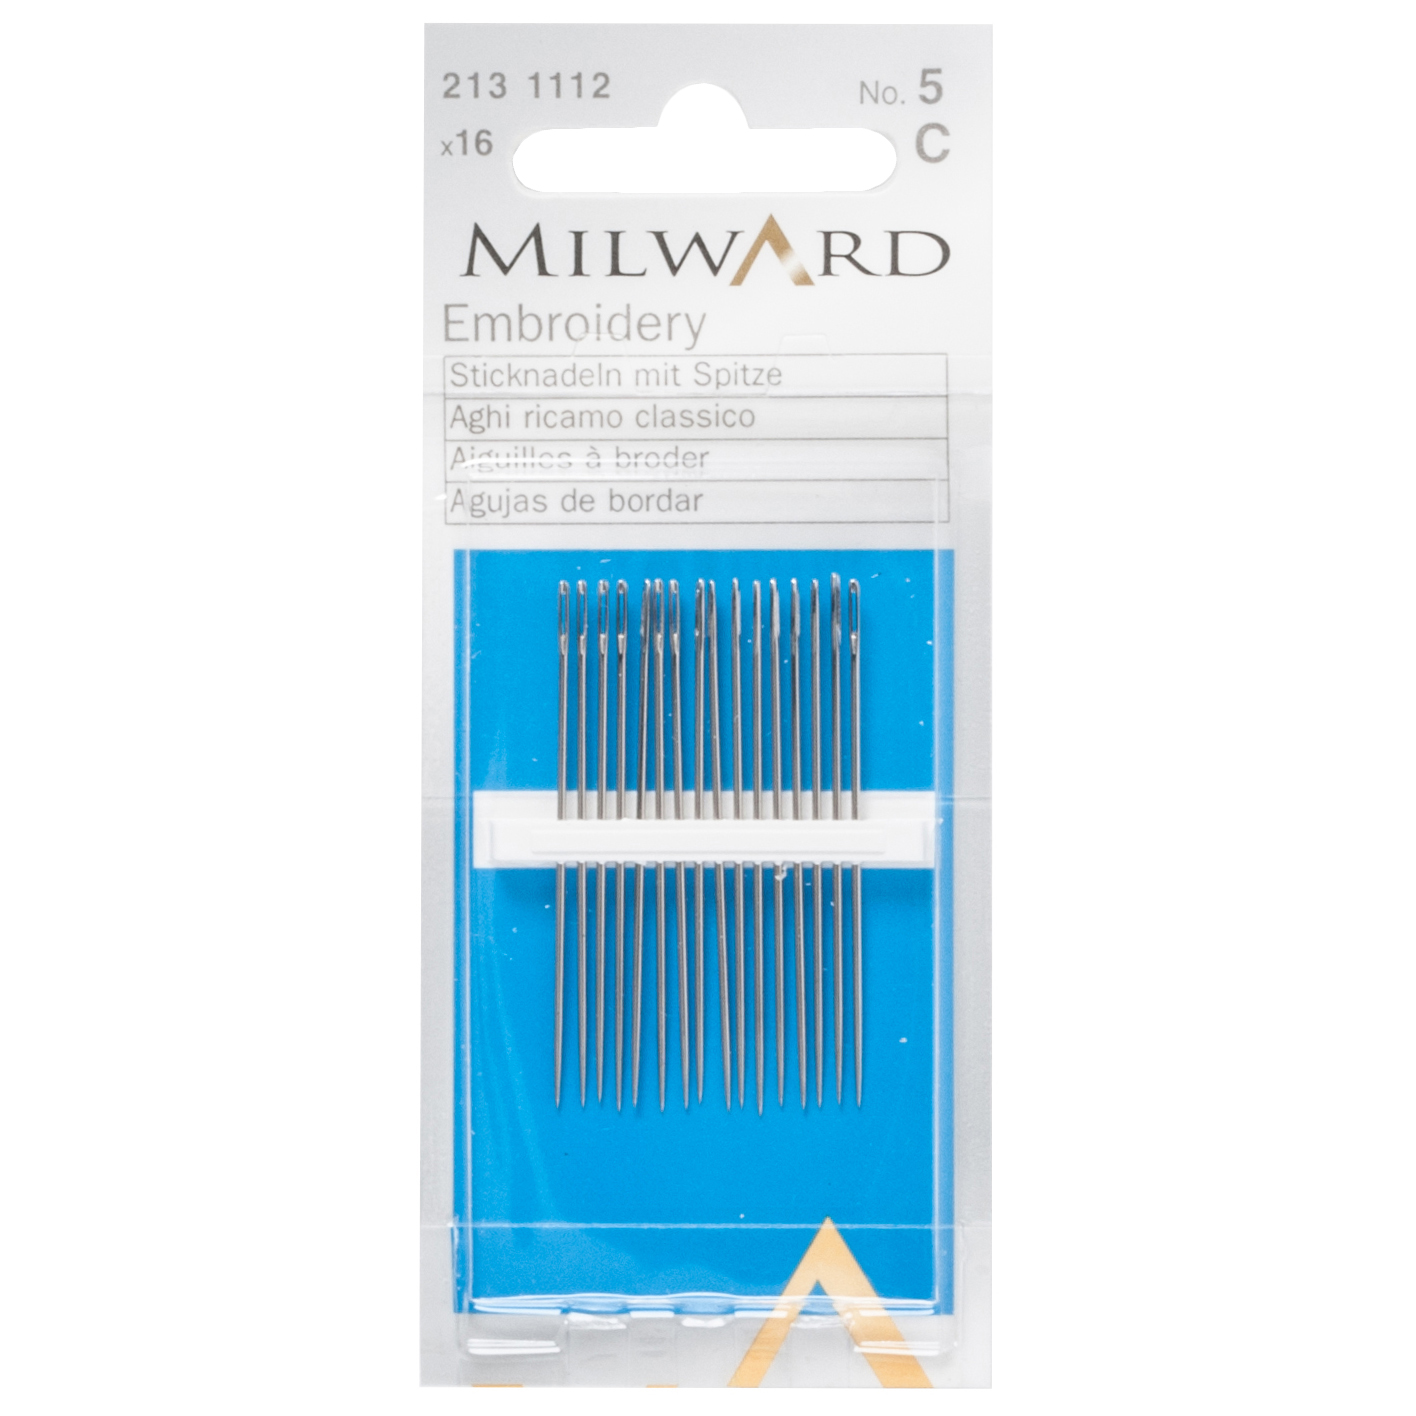 Hemline Embroidery/Crewel Hand Sewing Needles - Full Range of Sizes  Available!